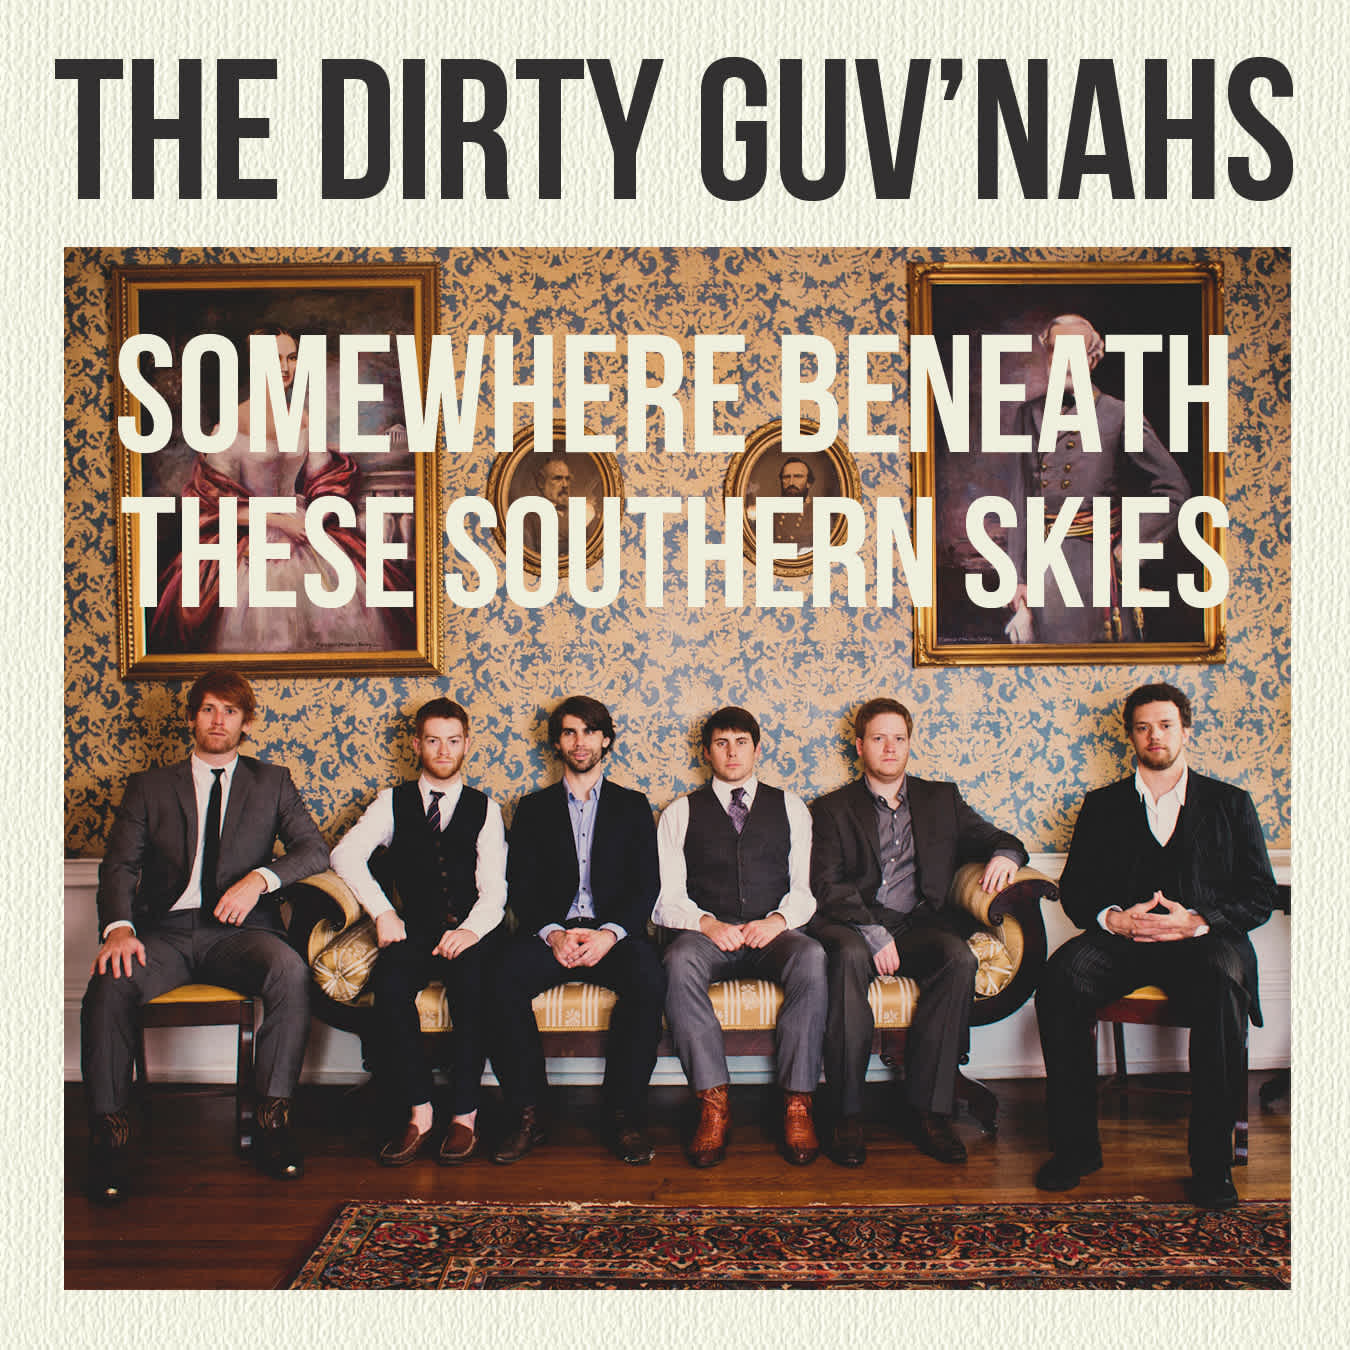 Somewhere Beneath These Southern Skies Album Cover